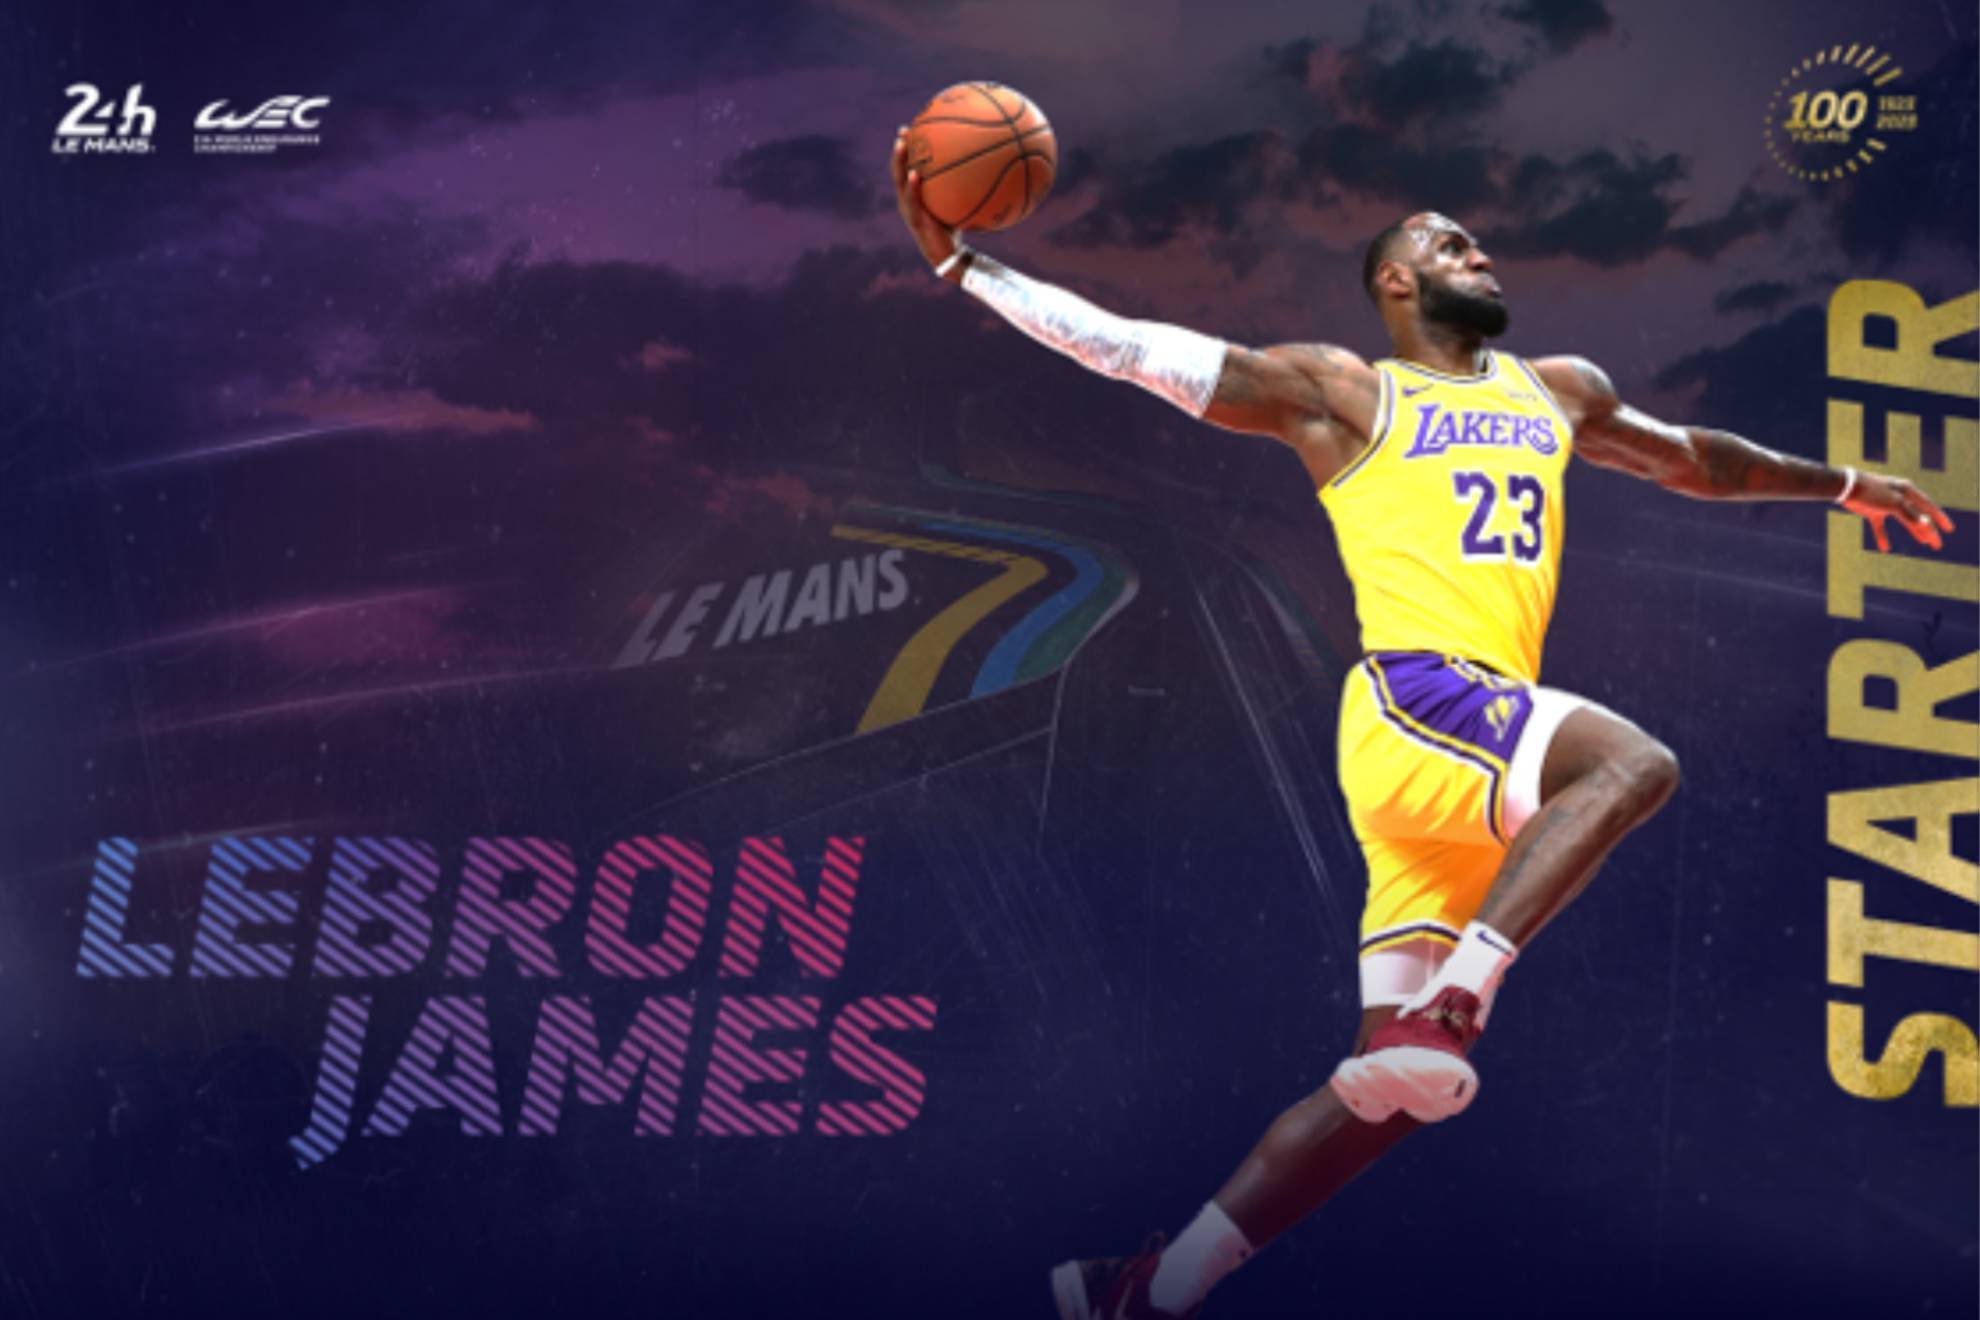 LeBron James to officially start the 24 Hours of Le Mans 2023